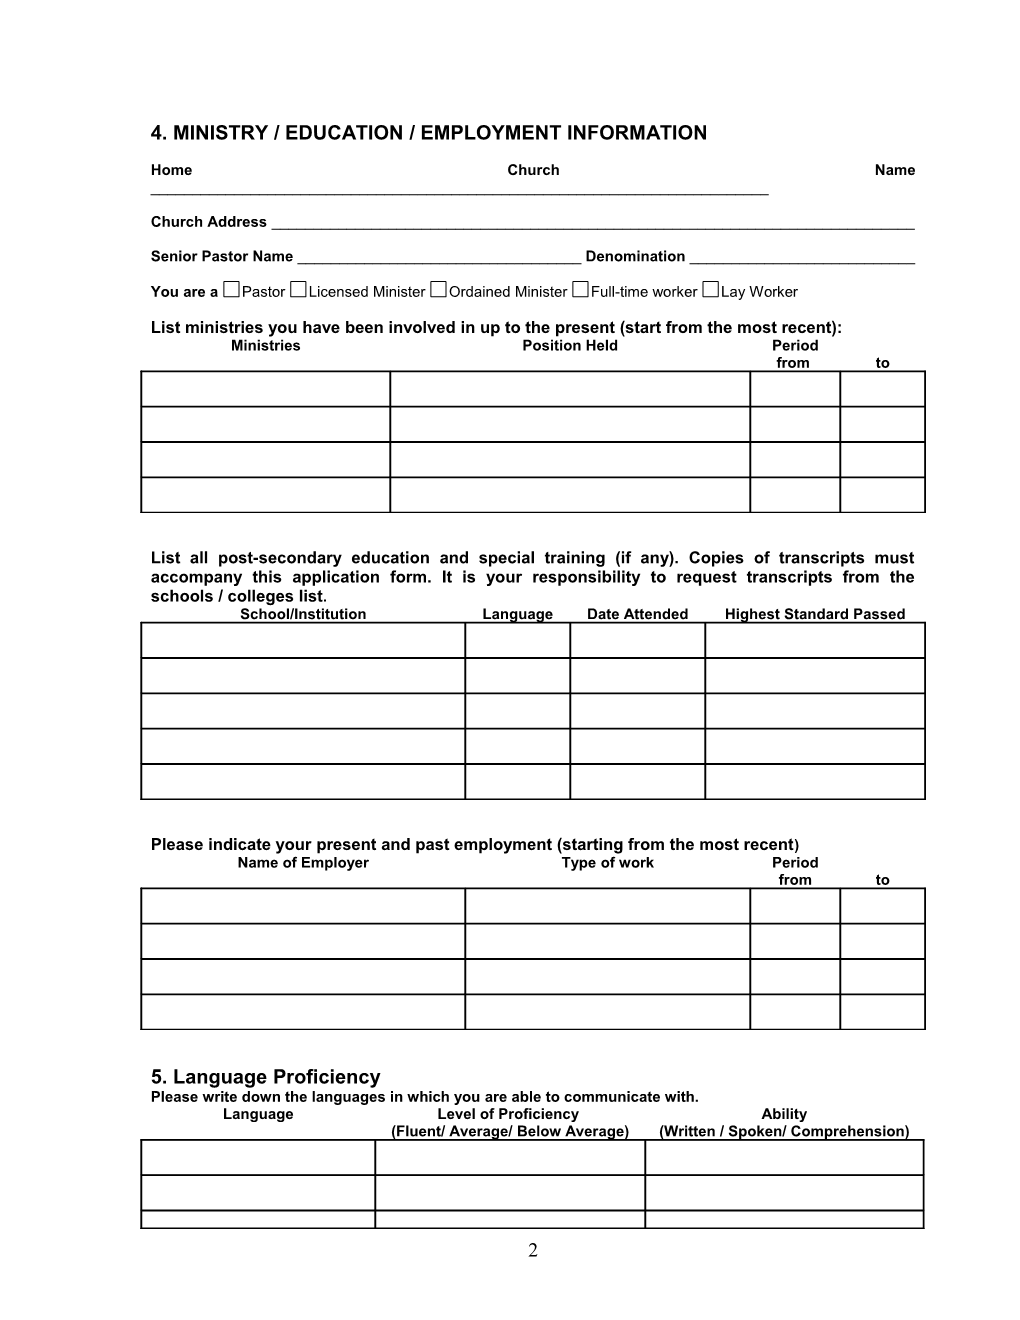 Application for Admission s5